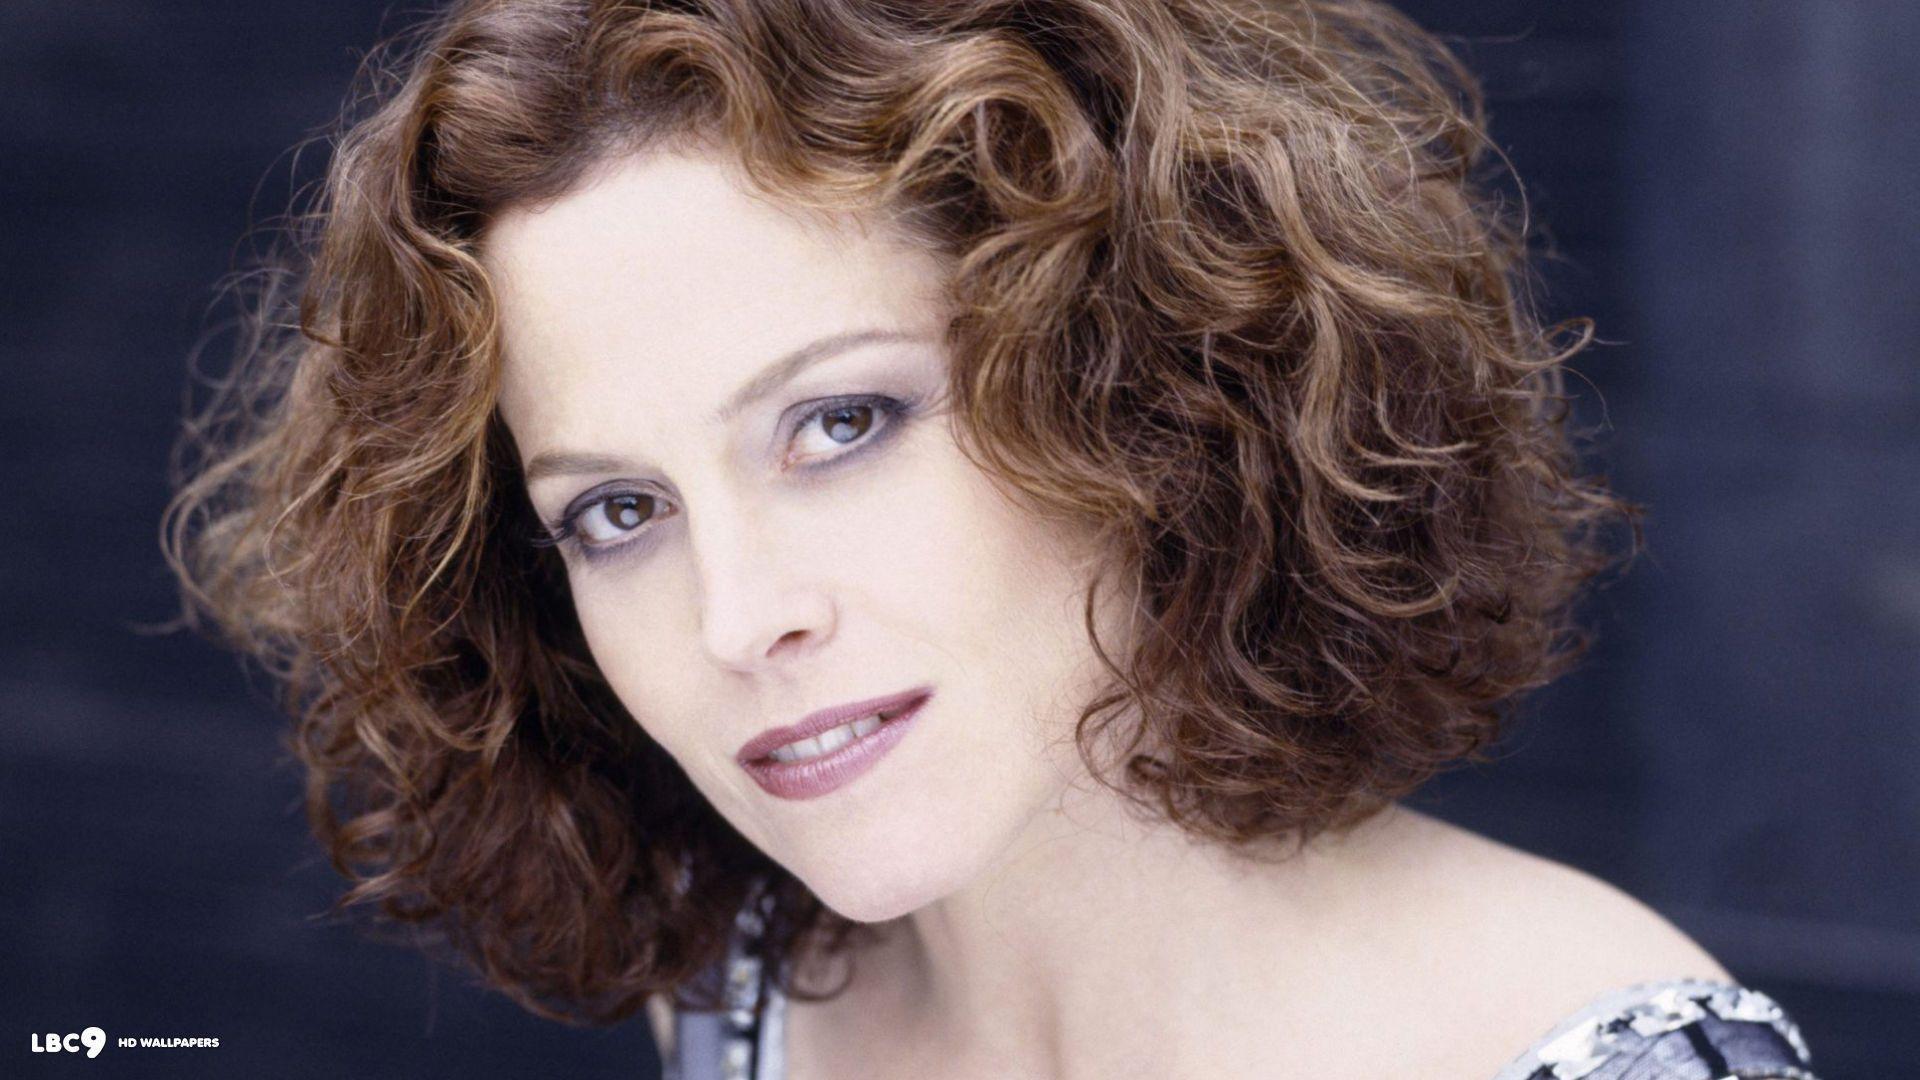 Sigourney pictures weaver of 41 Hottest